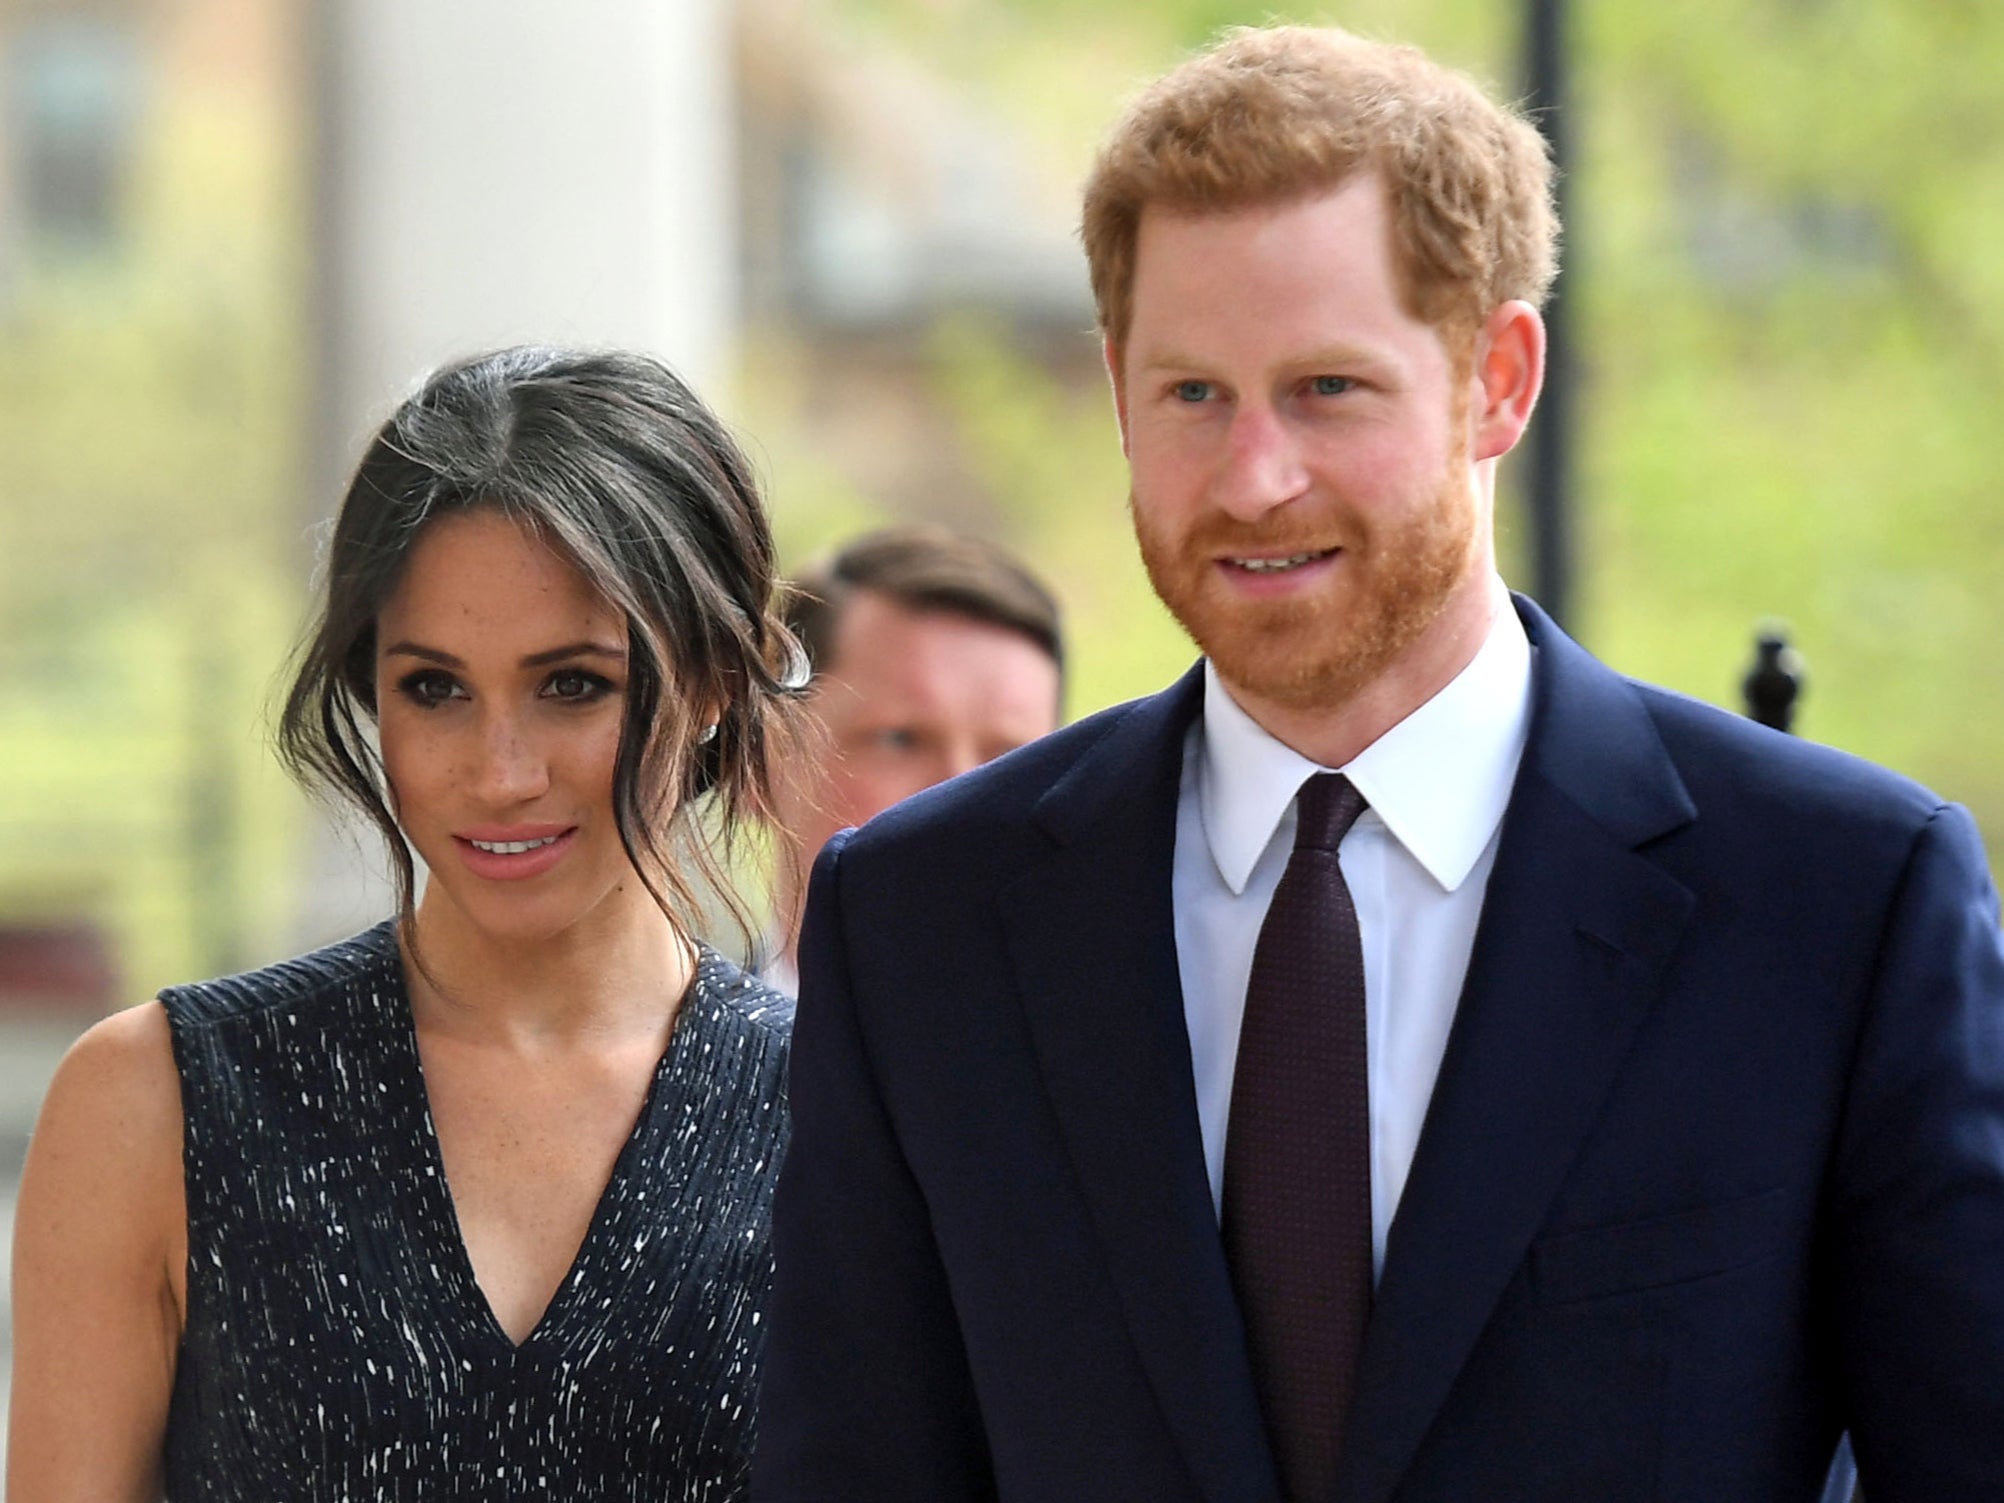 Clarkson has apologised for his column about Meghan Markle